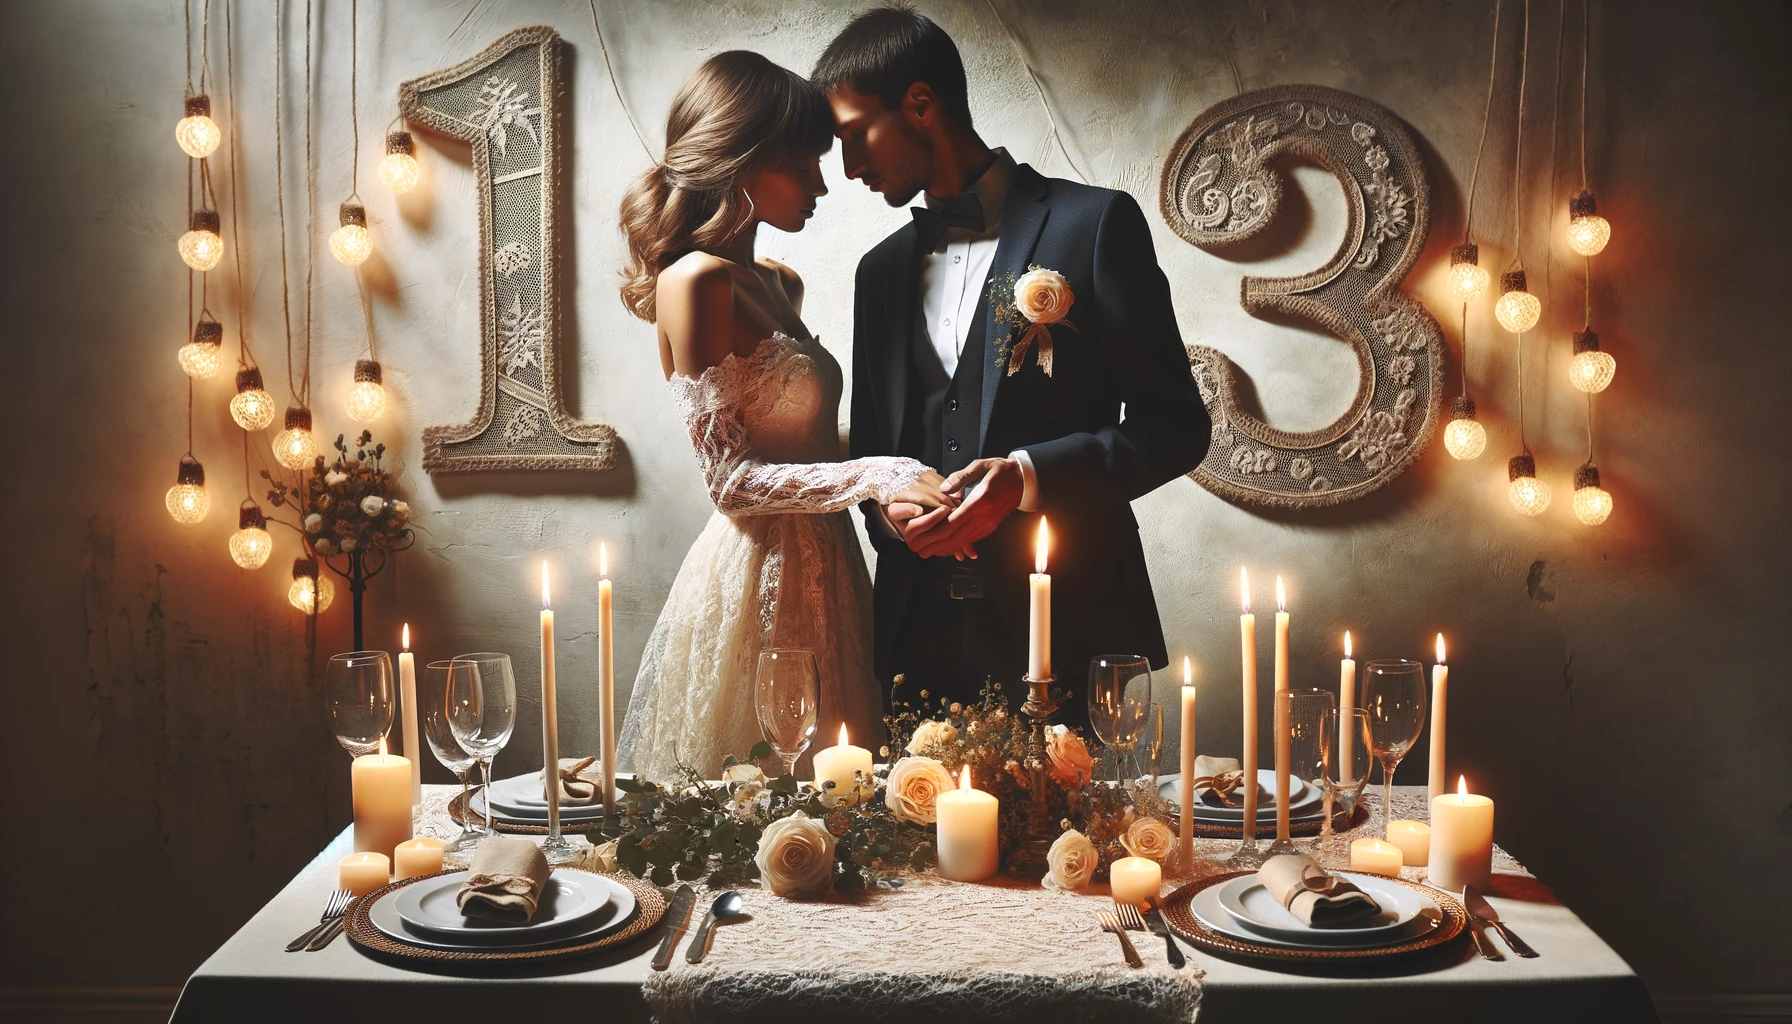 a visually appealing featured image ideal for an article about 13th wedding anniversary celebration ideas